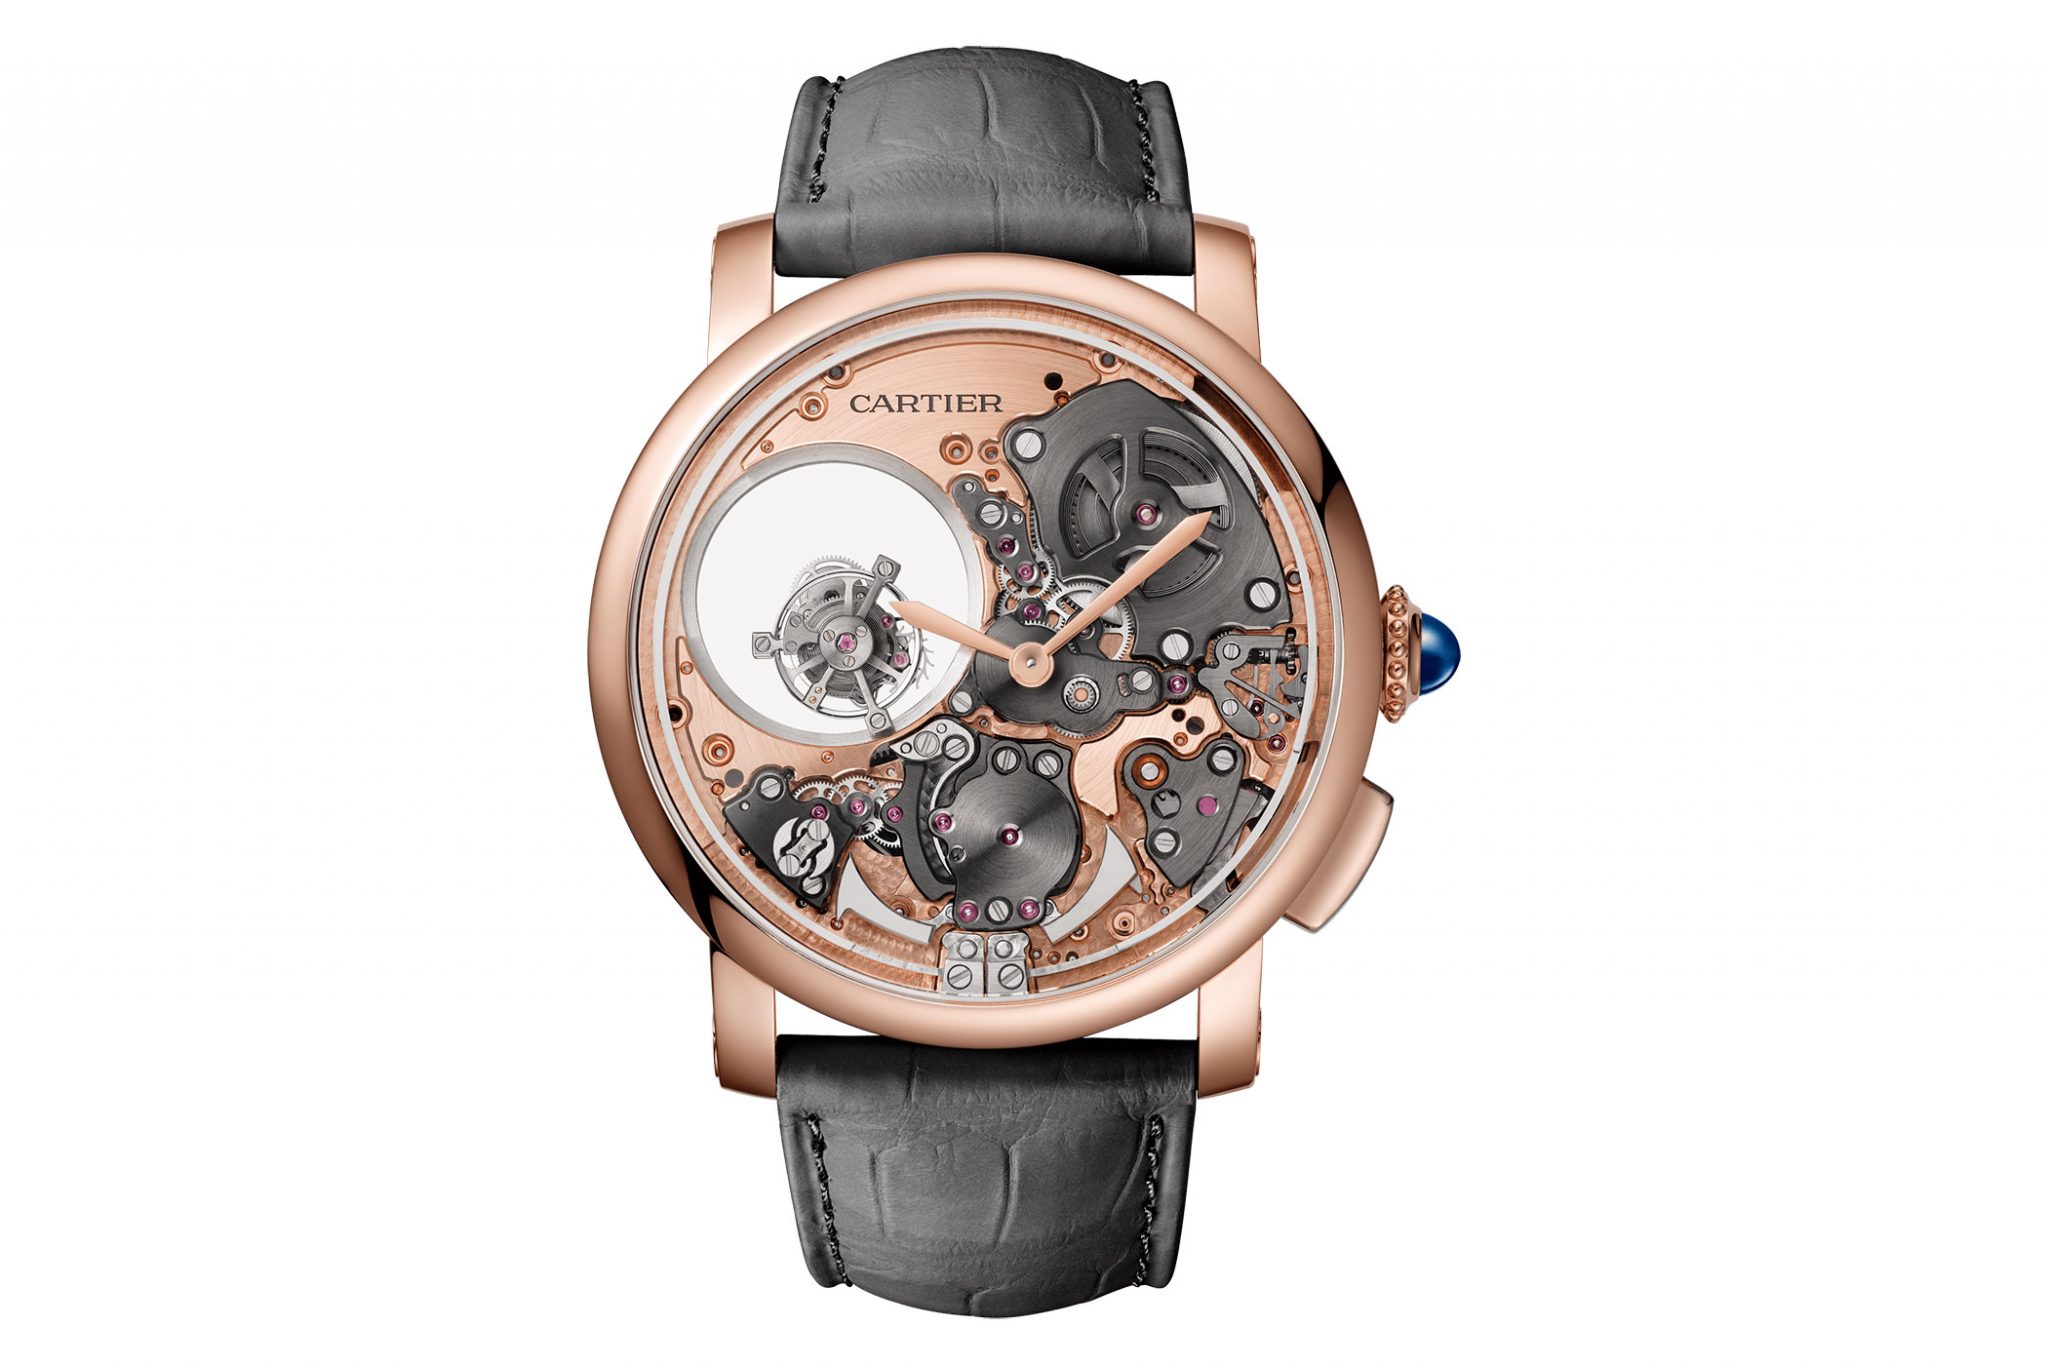 Cartier Rotonde de Cartier Minute Repeater Mysterious Double Tourbillon watch WHRO0061 minute repeater mysterious double skeleton